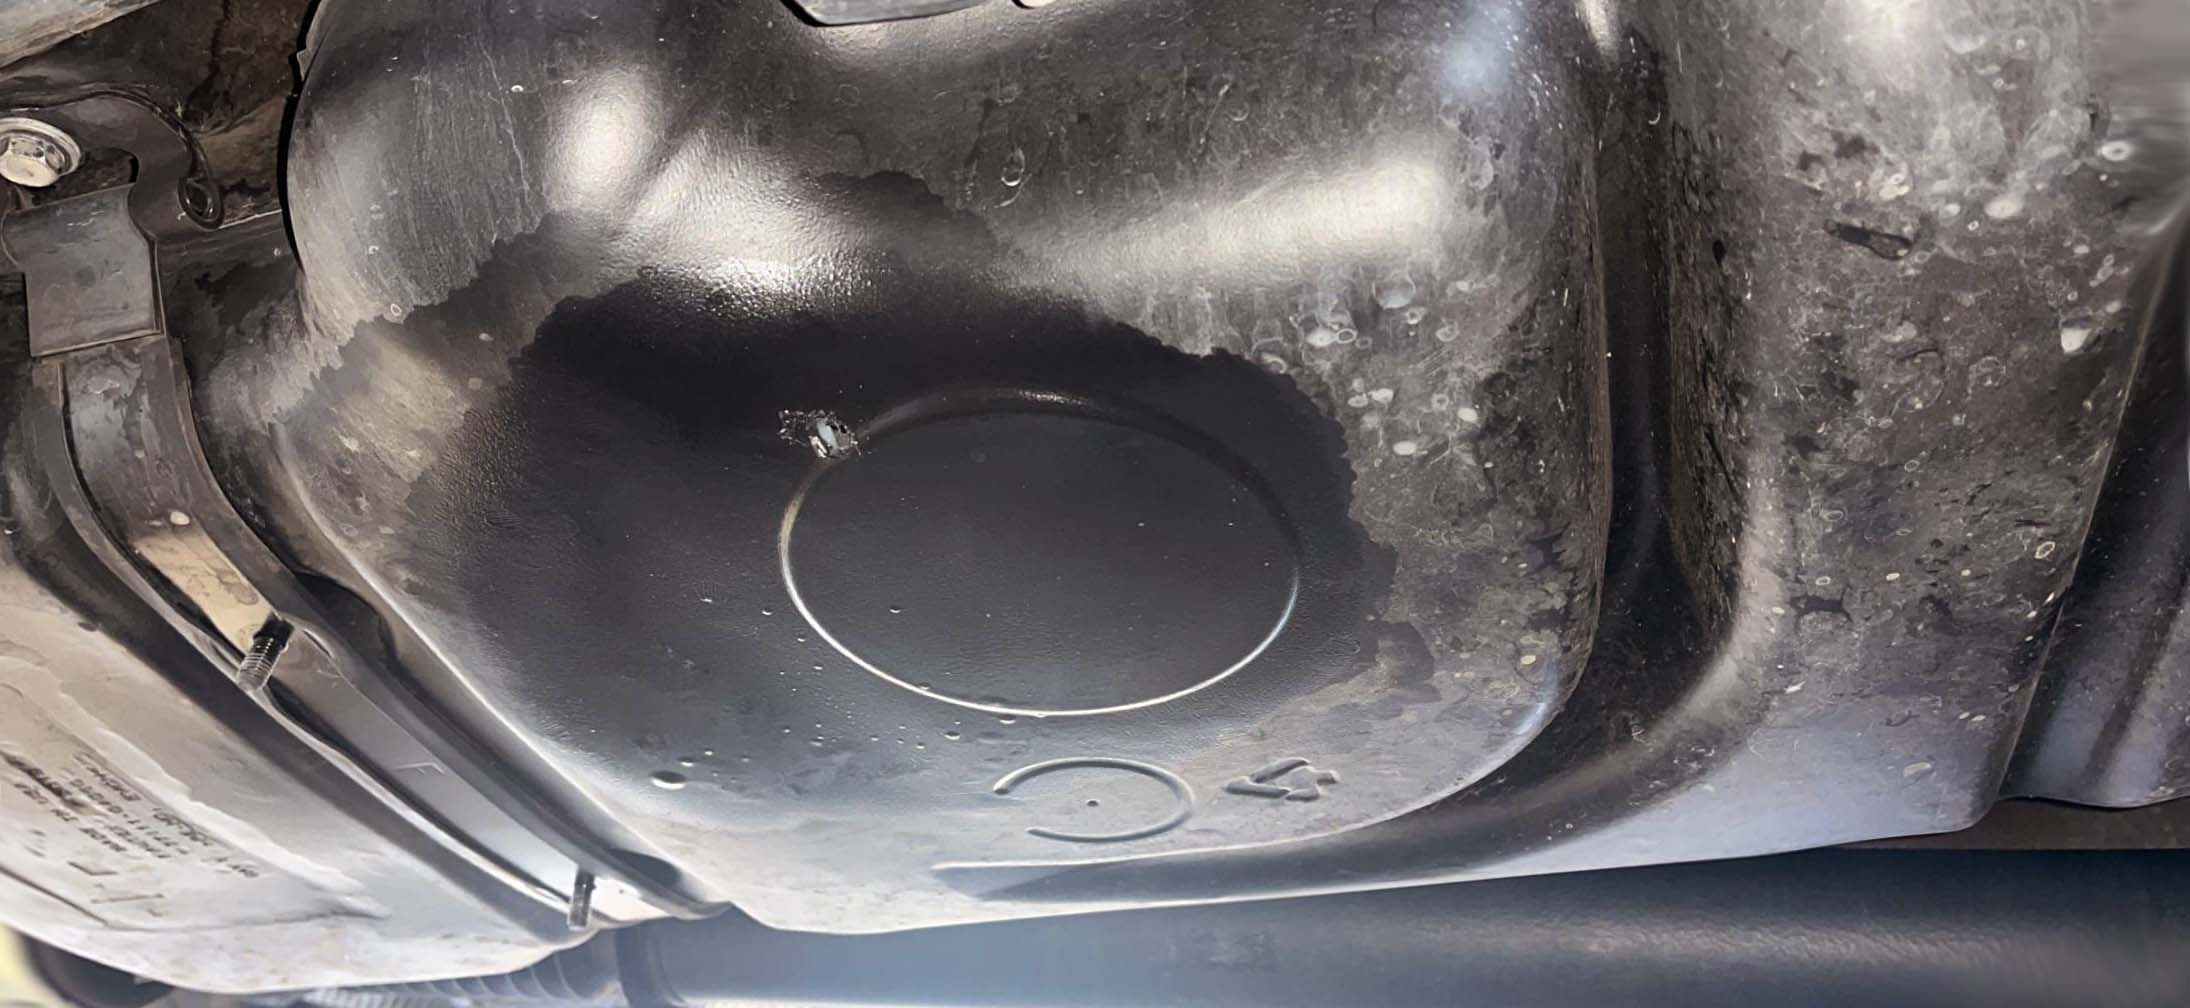 How to Fix a Hole in a Gas Tank